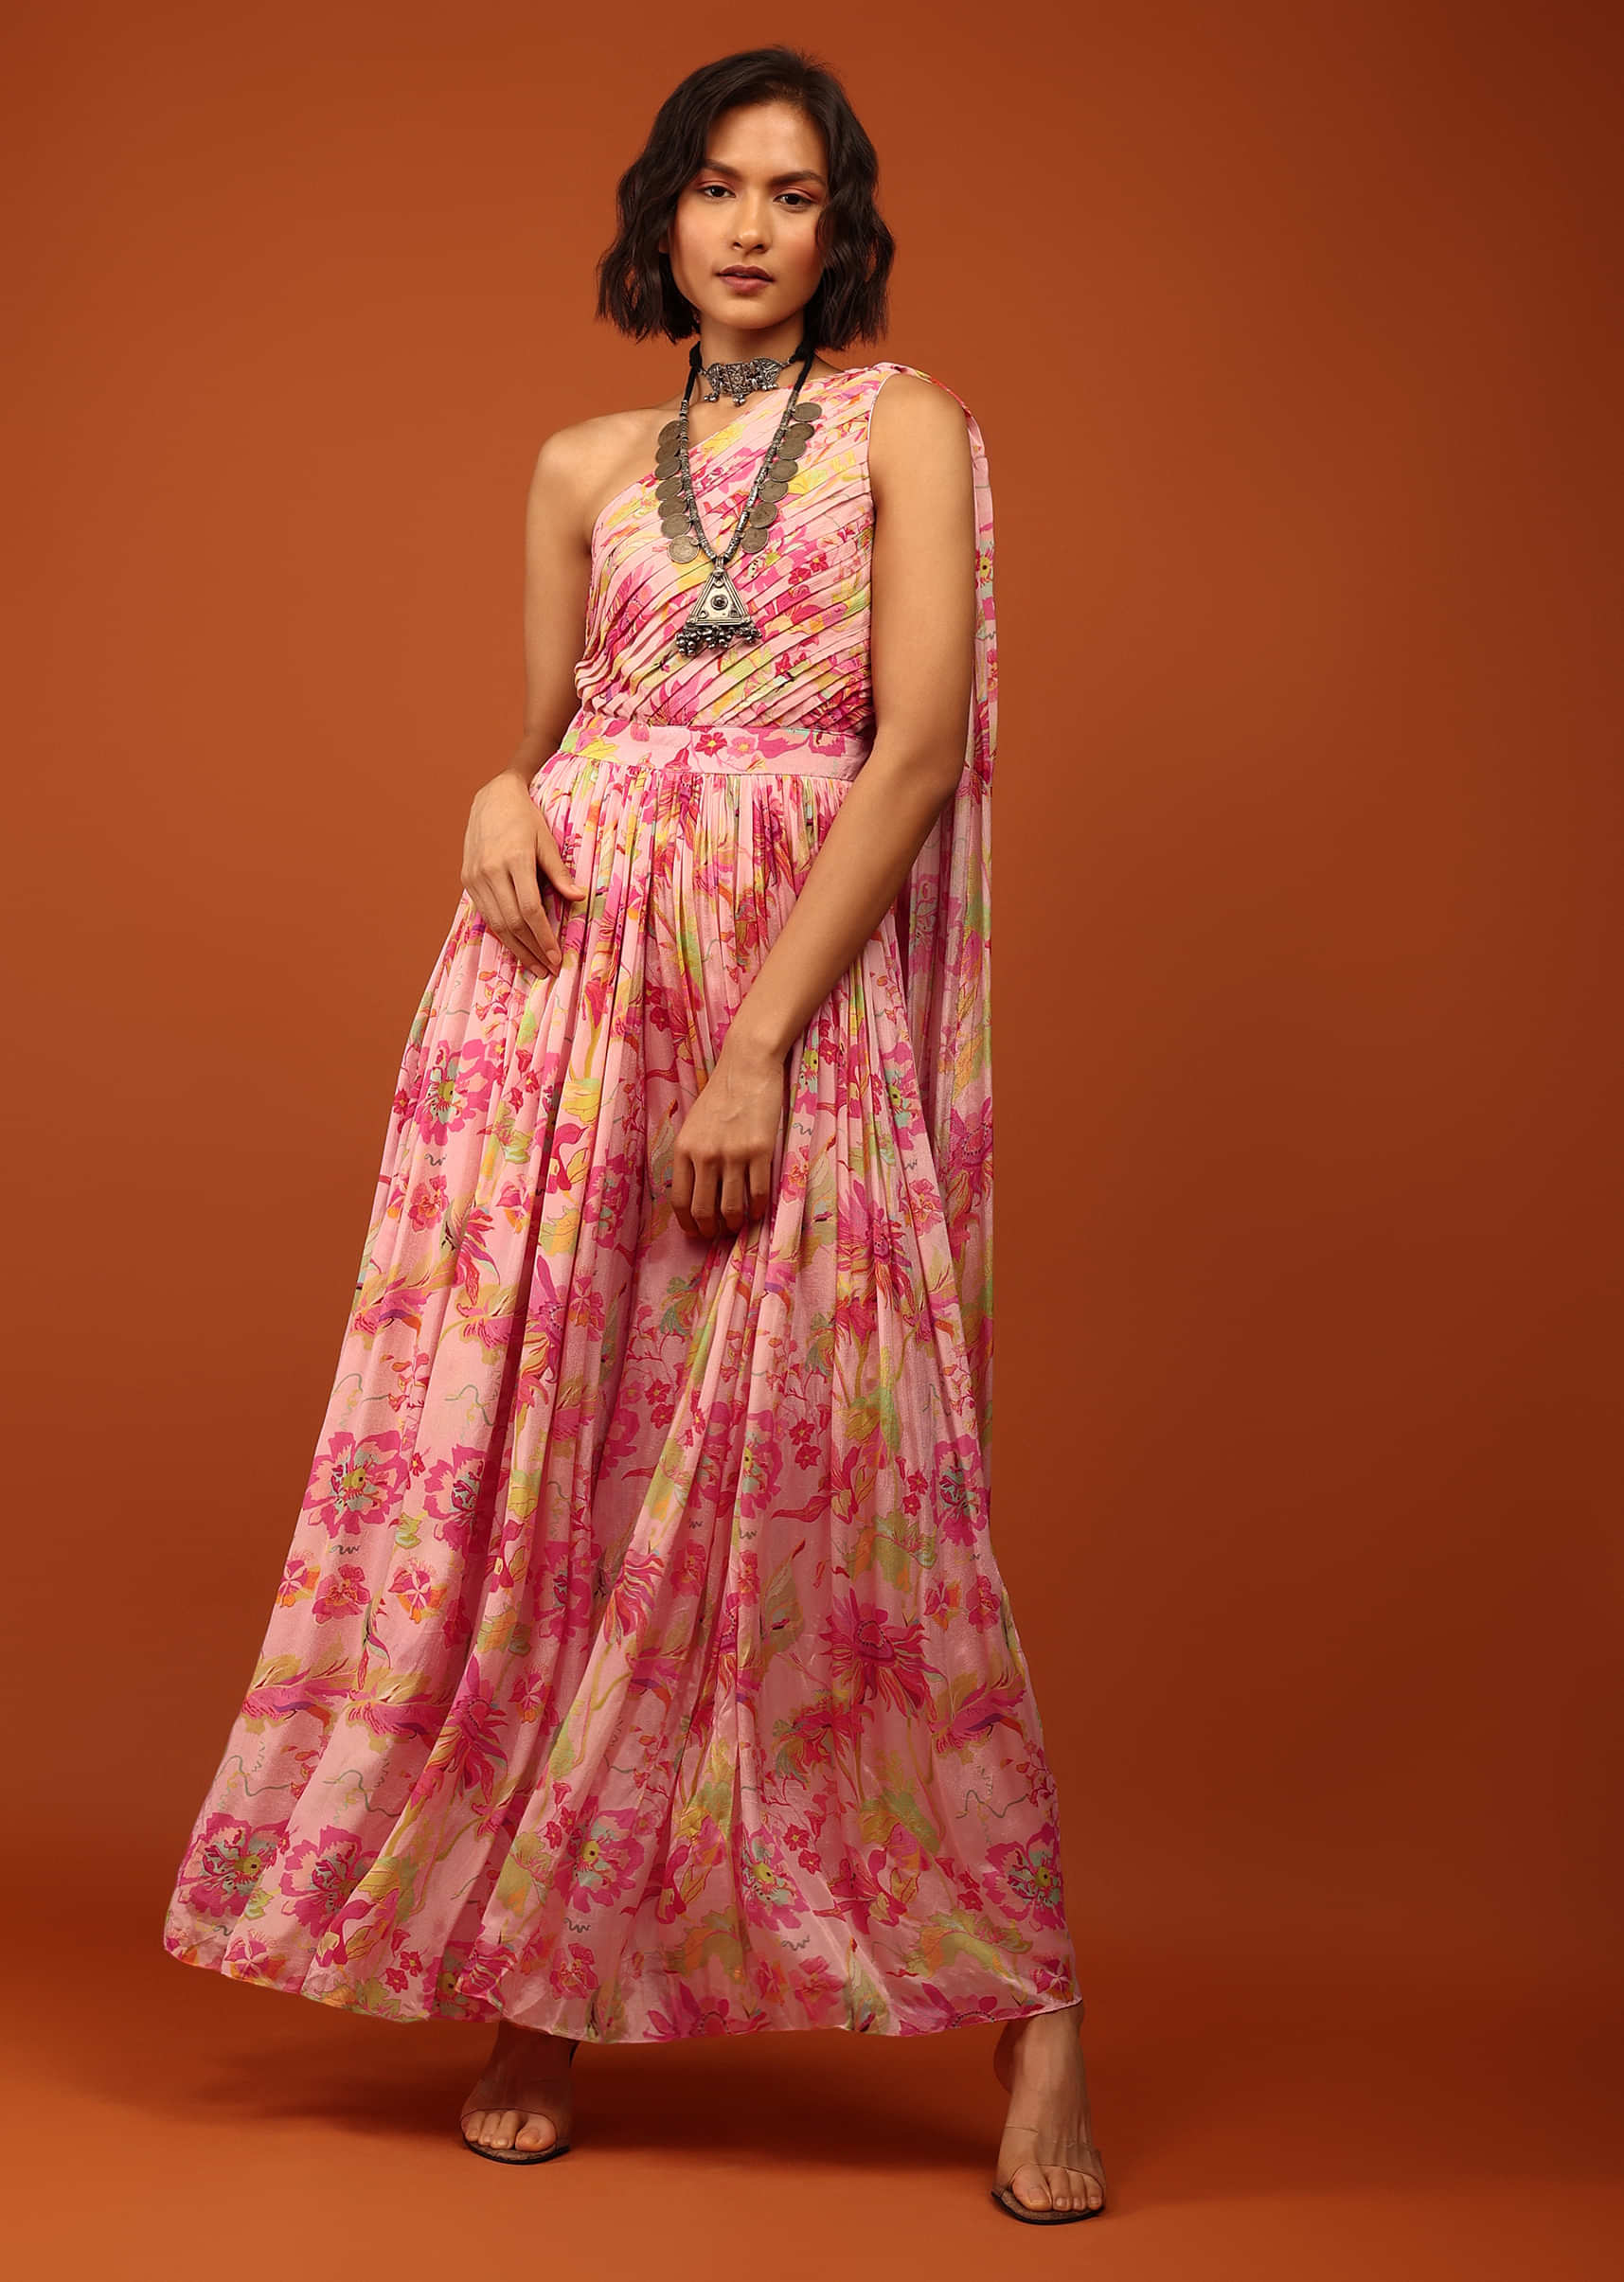 Blush Pink Floral Print Jumpsuit With Slantly Pleated Bodice And Attached Drape On The Shoulder